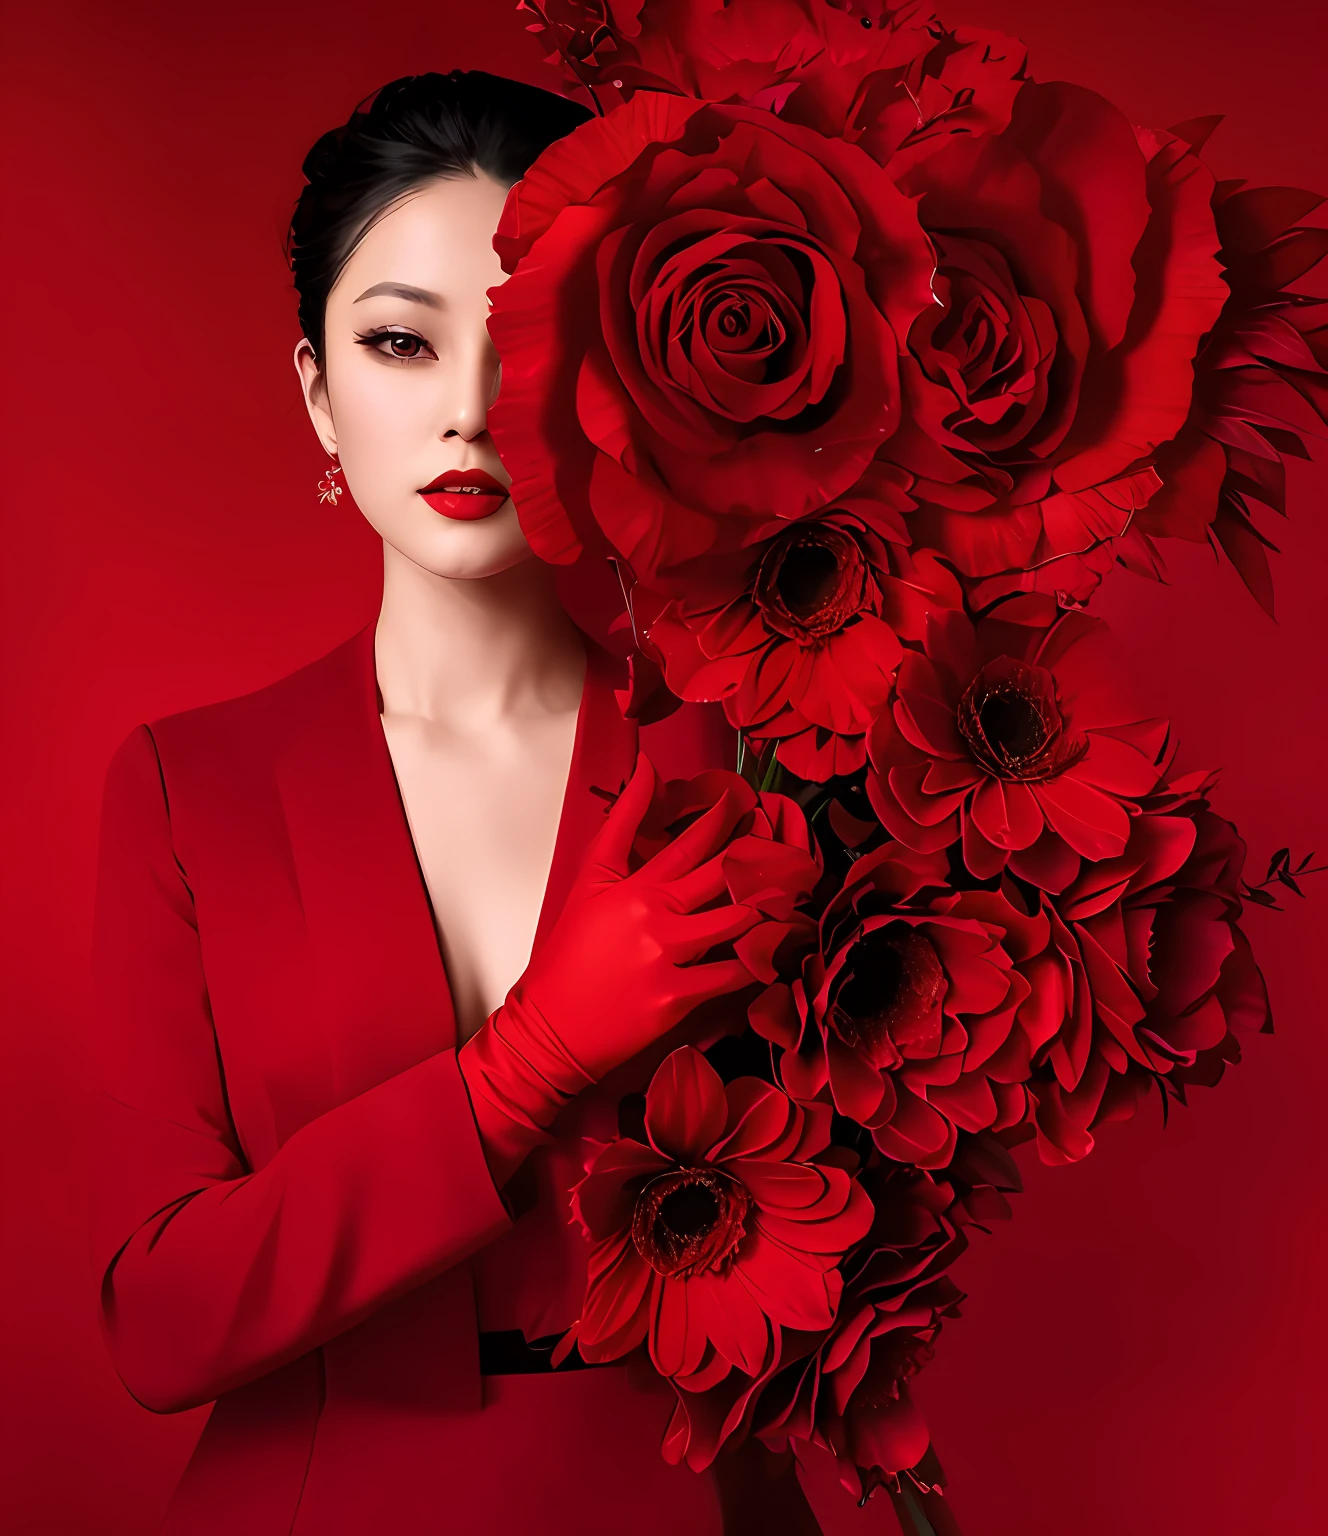 There was a woman in a red suit holding a bouquet of flowers, Zhang Jingna, rich red colors, All red, fine art fashion photography, vibrant red colors, red adornments, shades of red, Red roses, red colour, xue han, Red accents, Red clothes, Very red, Red tones, celestial red flowers vibe, wearing red